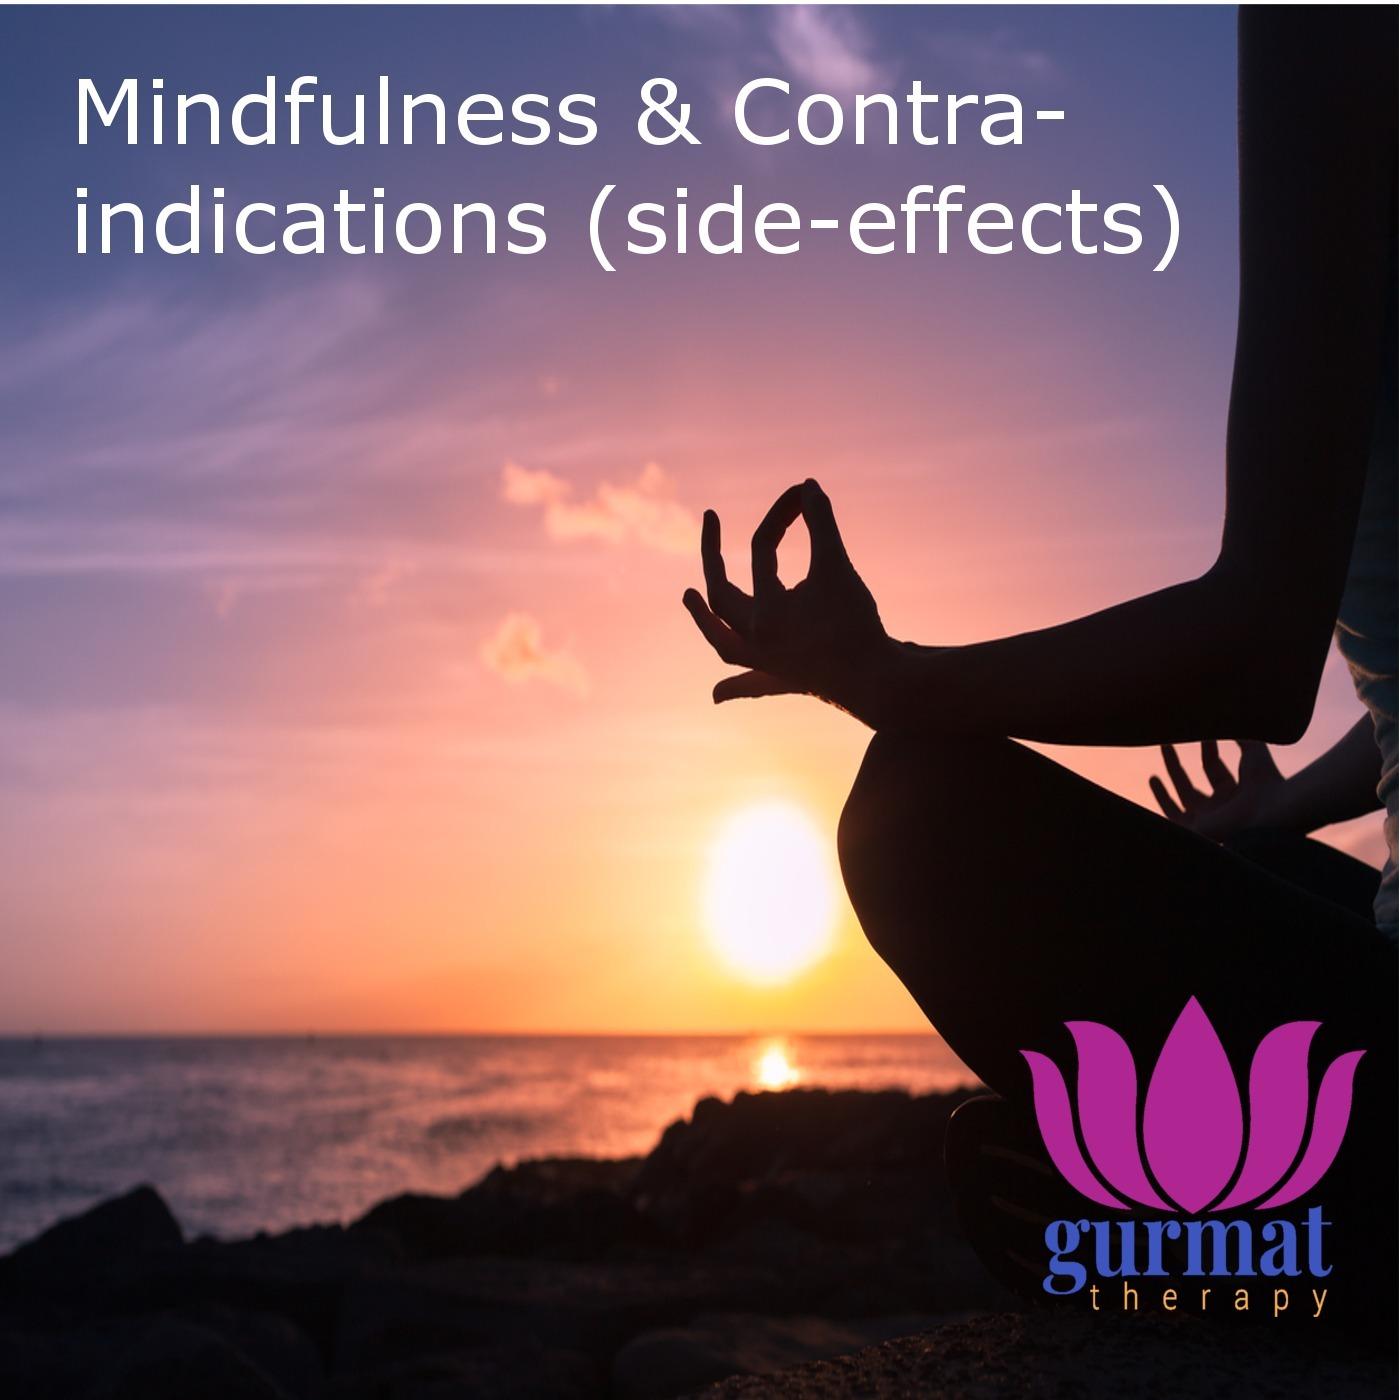 Mindfulness and side-effects (contra indications)